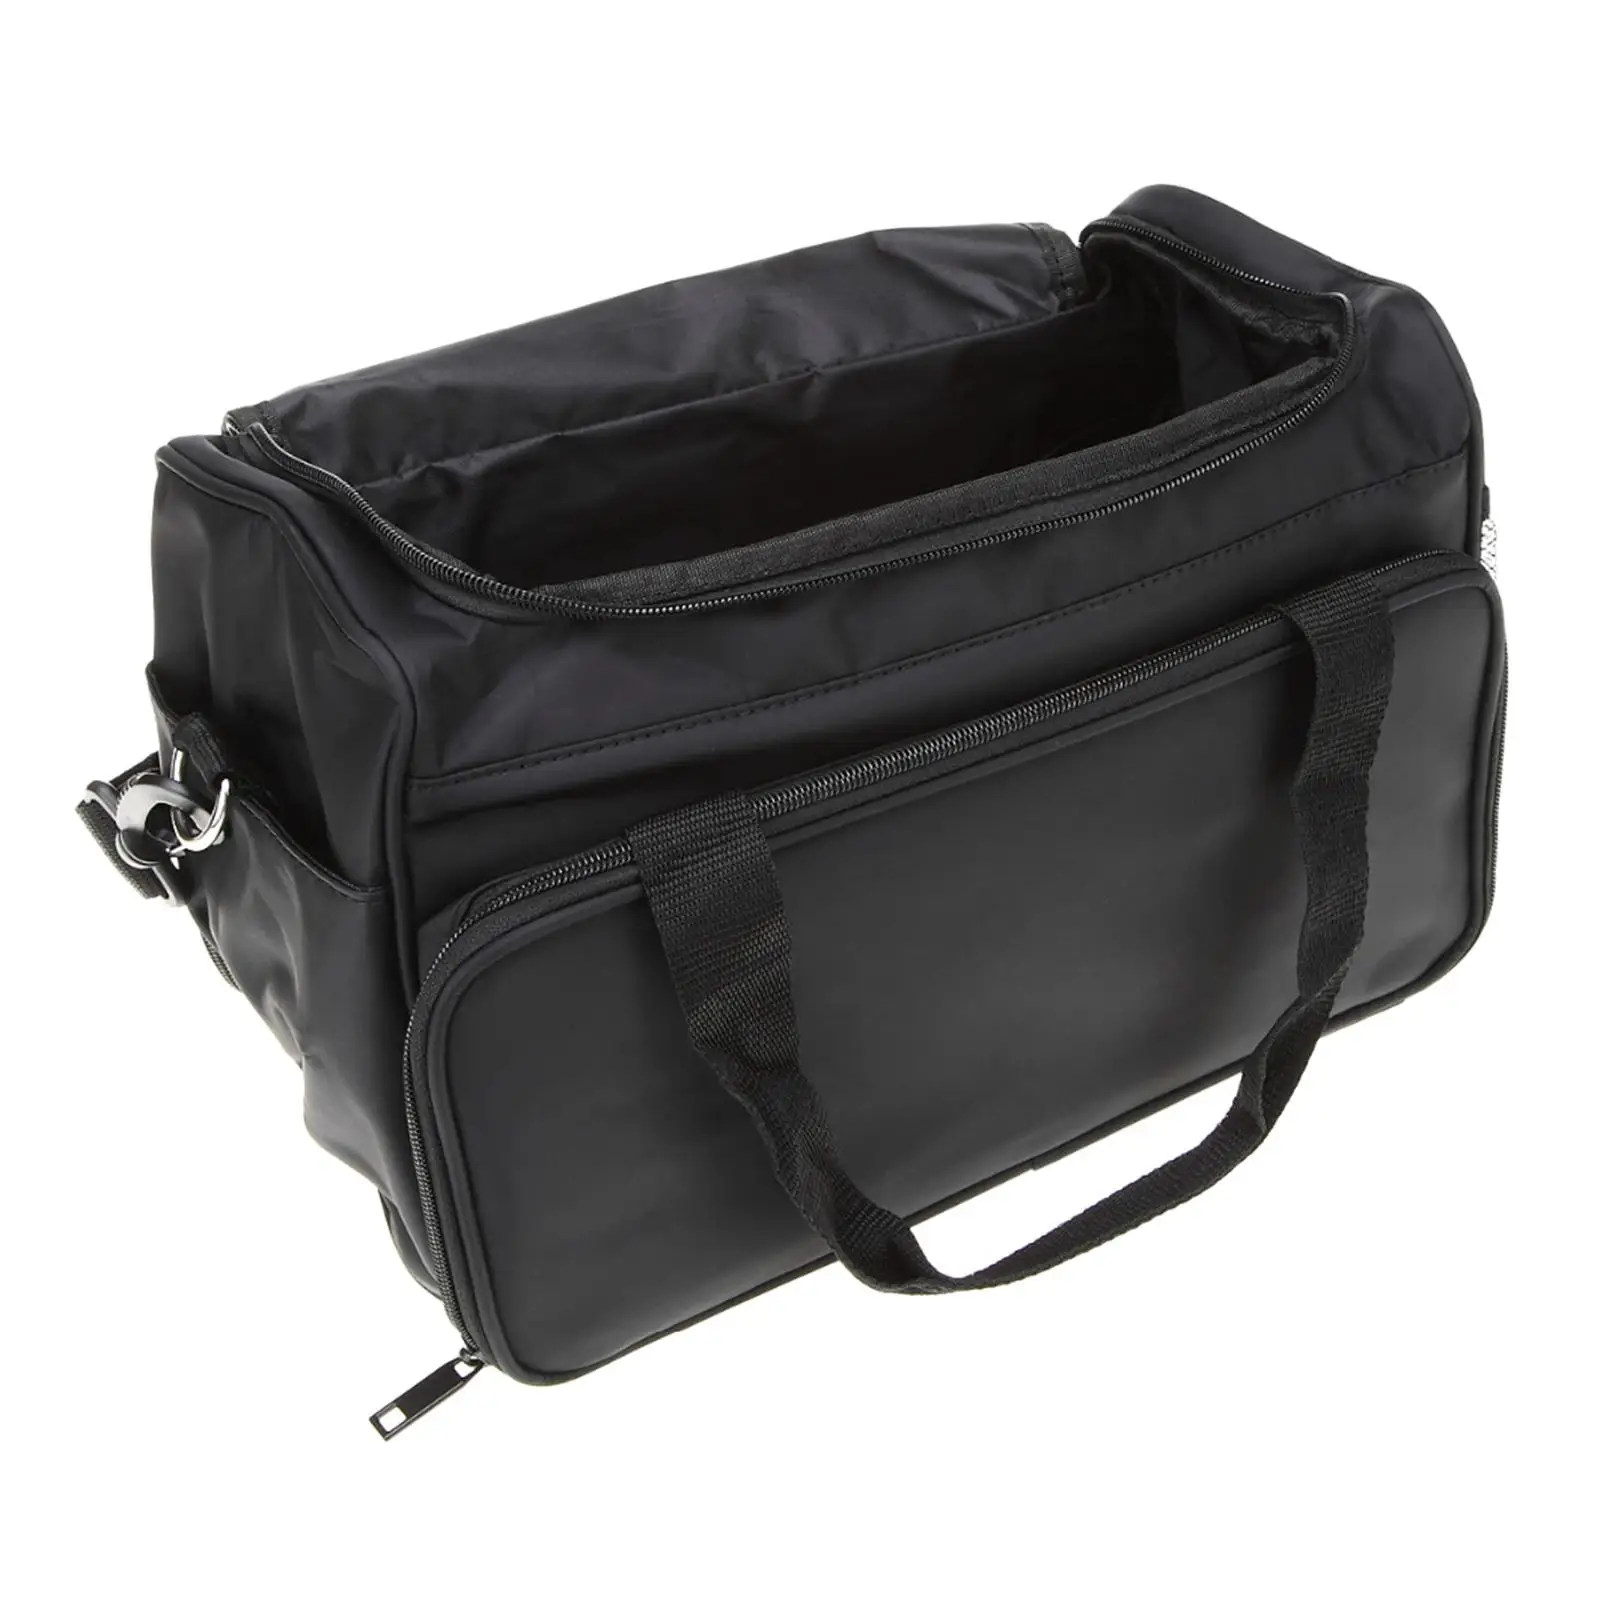 Toiletry Bag Professional Portable Durable Hairdressing Tool Bag for Hairstylist Tools Grooming Hairpins Toiletries Cosmetics